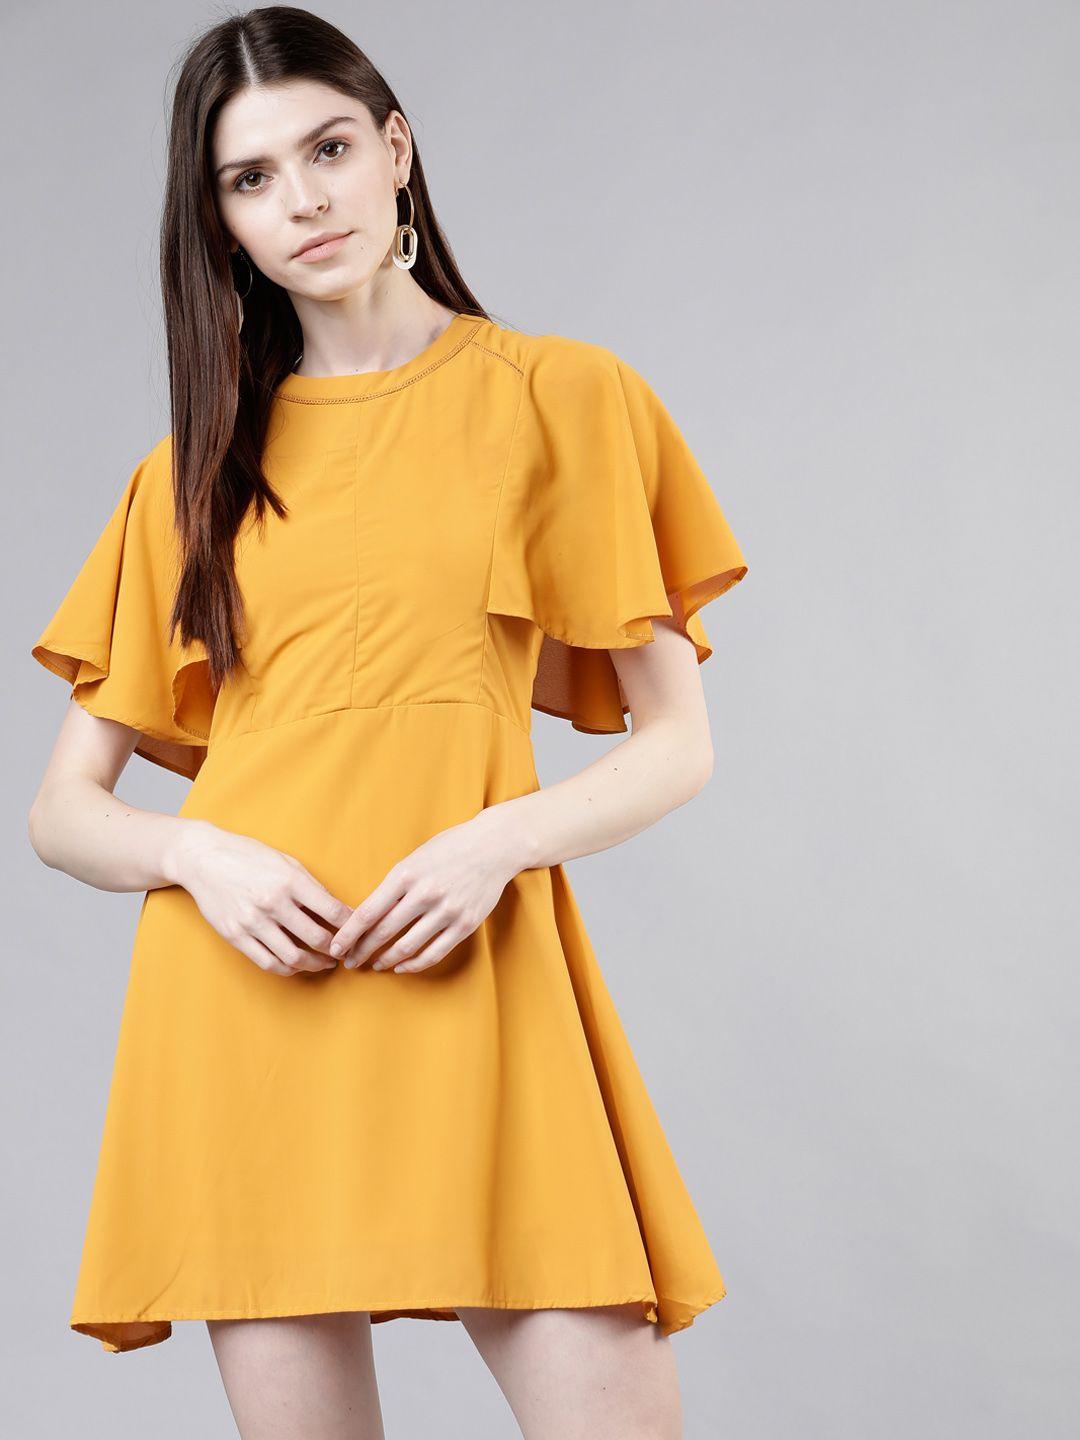 tokyo talkies women solid mustard yellow fit and flare dress